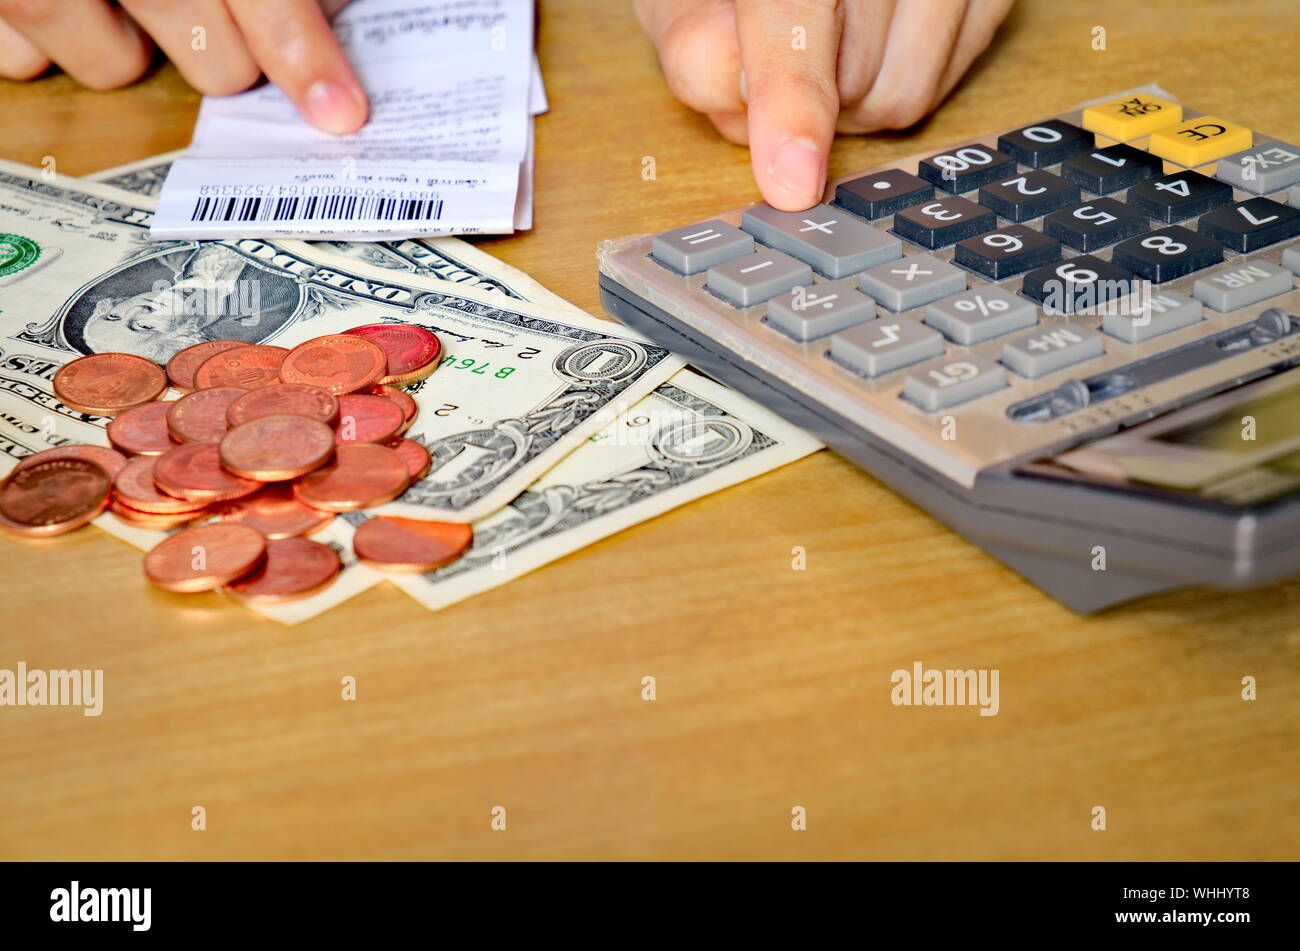 Close-up Of Hands Touching Calculator And Financial Bill On Table Stock Photo